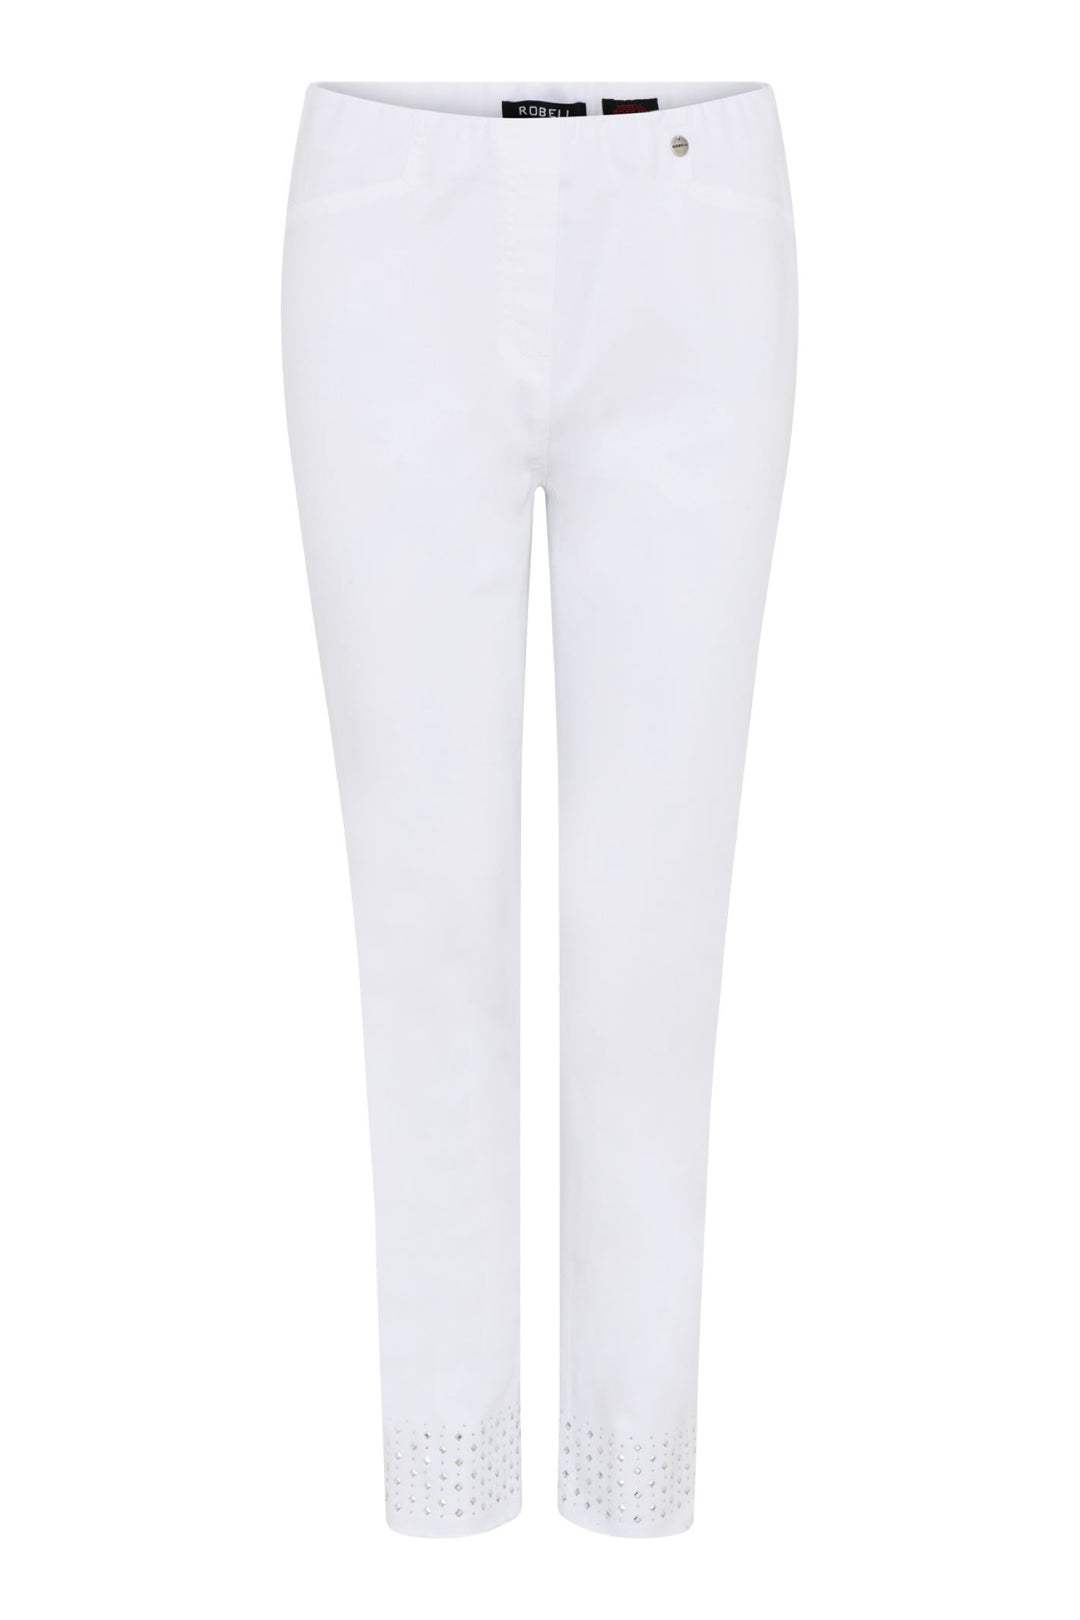 Robell White Trouser with stud detail to ankle 53440